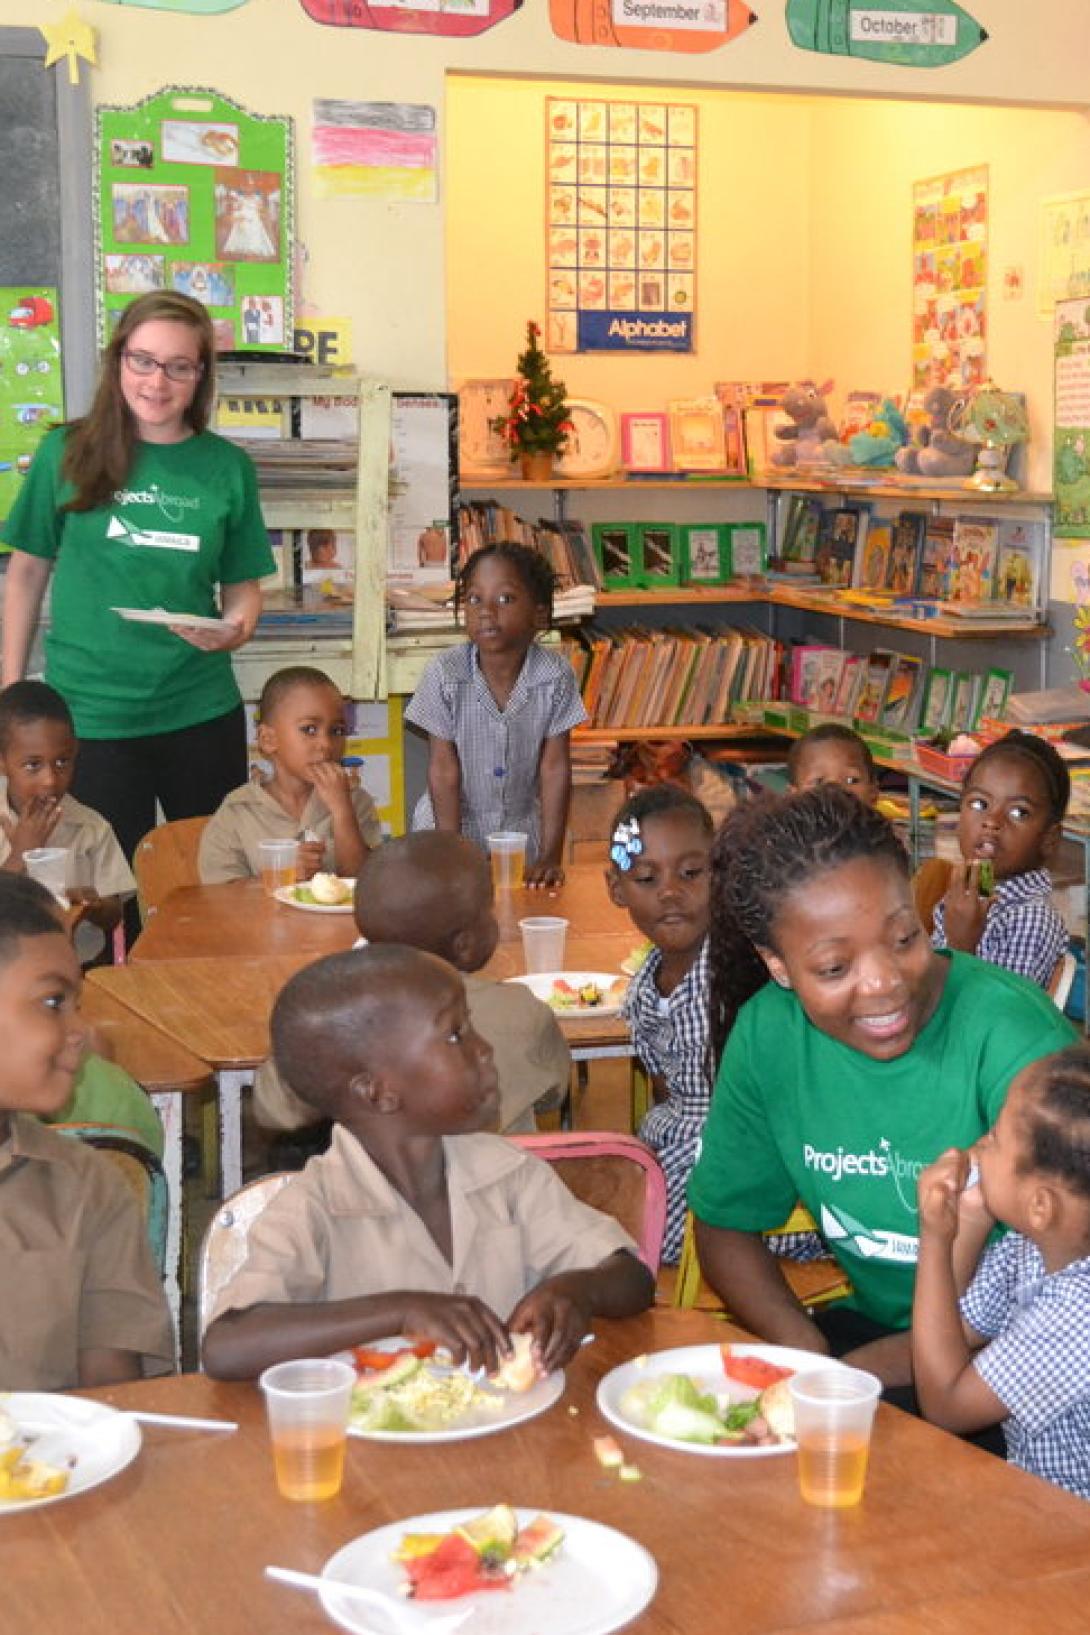 A group of Childcare volunteers in Jamaica prepare a healthy breakfast for children at a disadvantaged school.